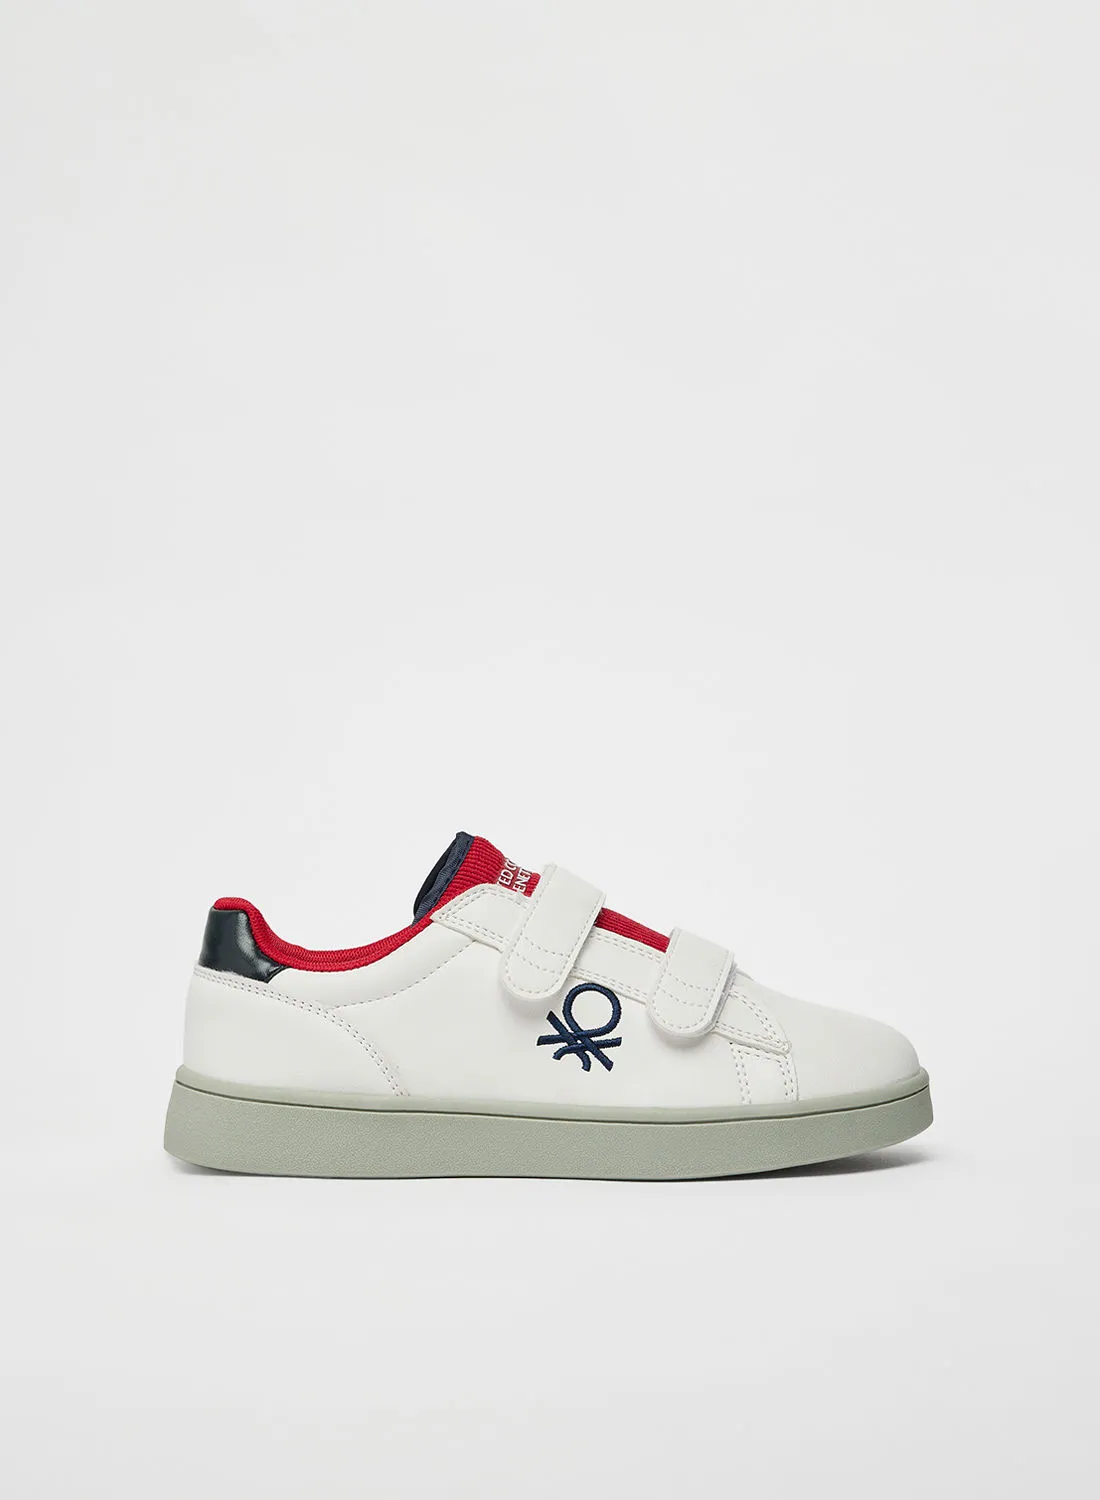 UNITED COLORS OF BENETTON Boys Label LTX Sneakers